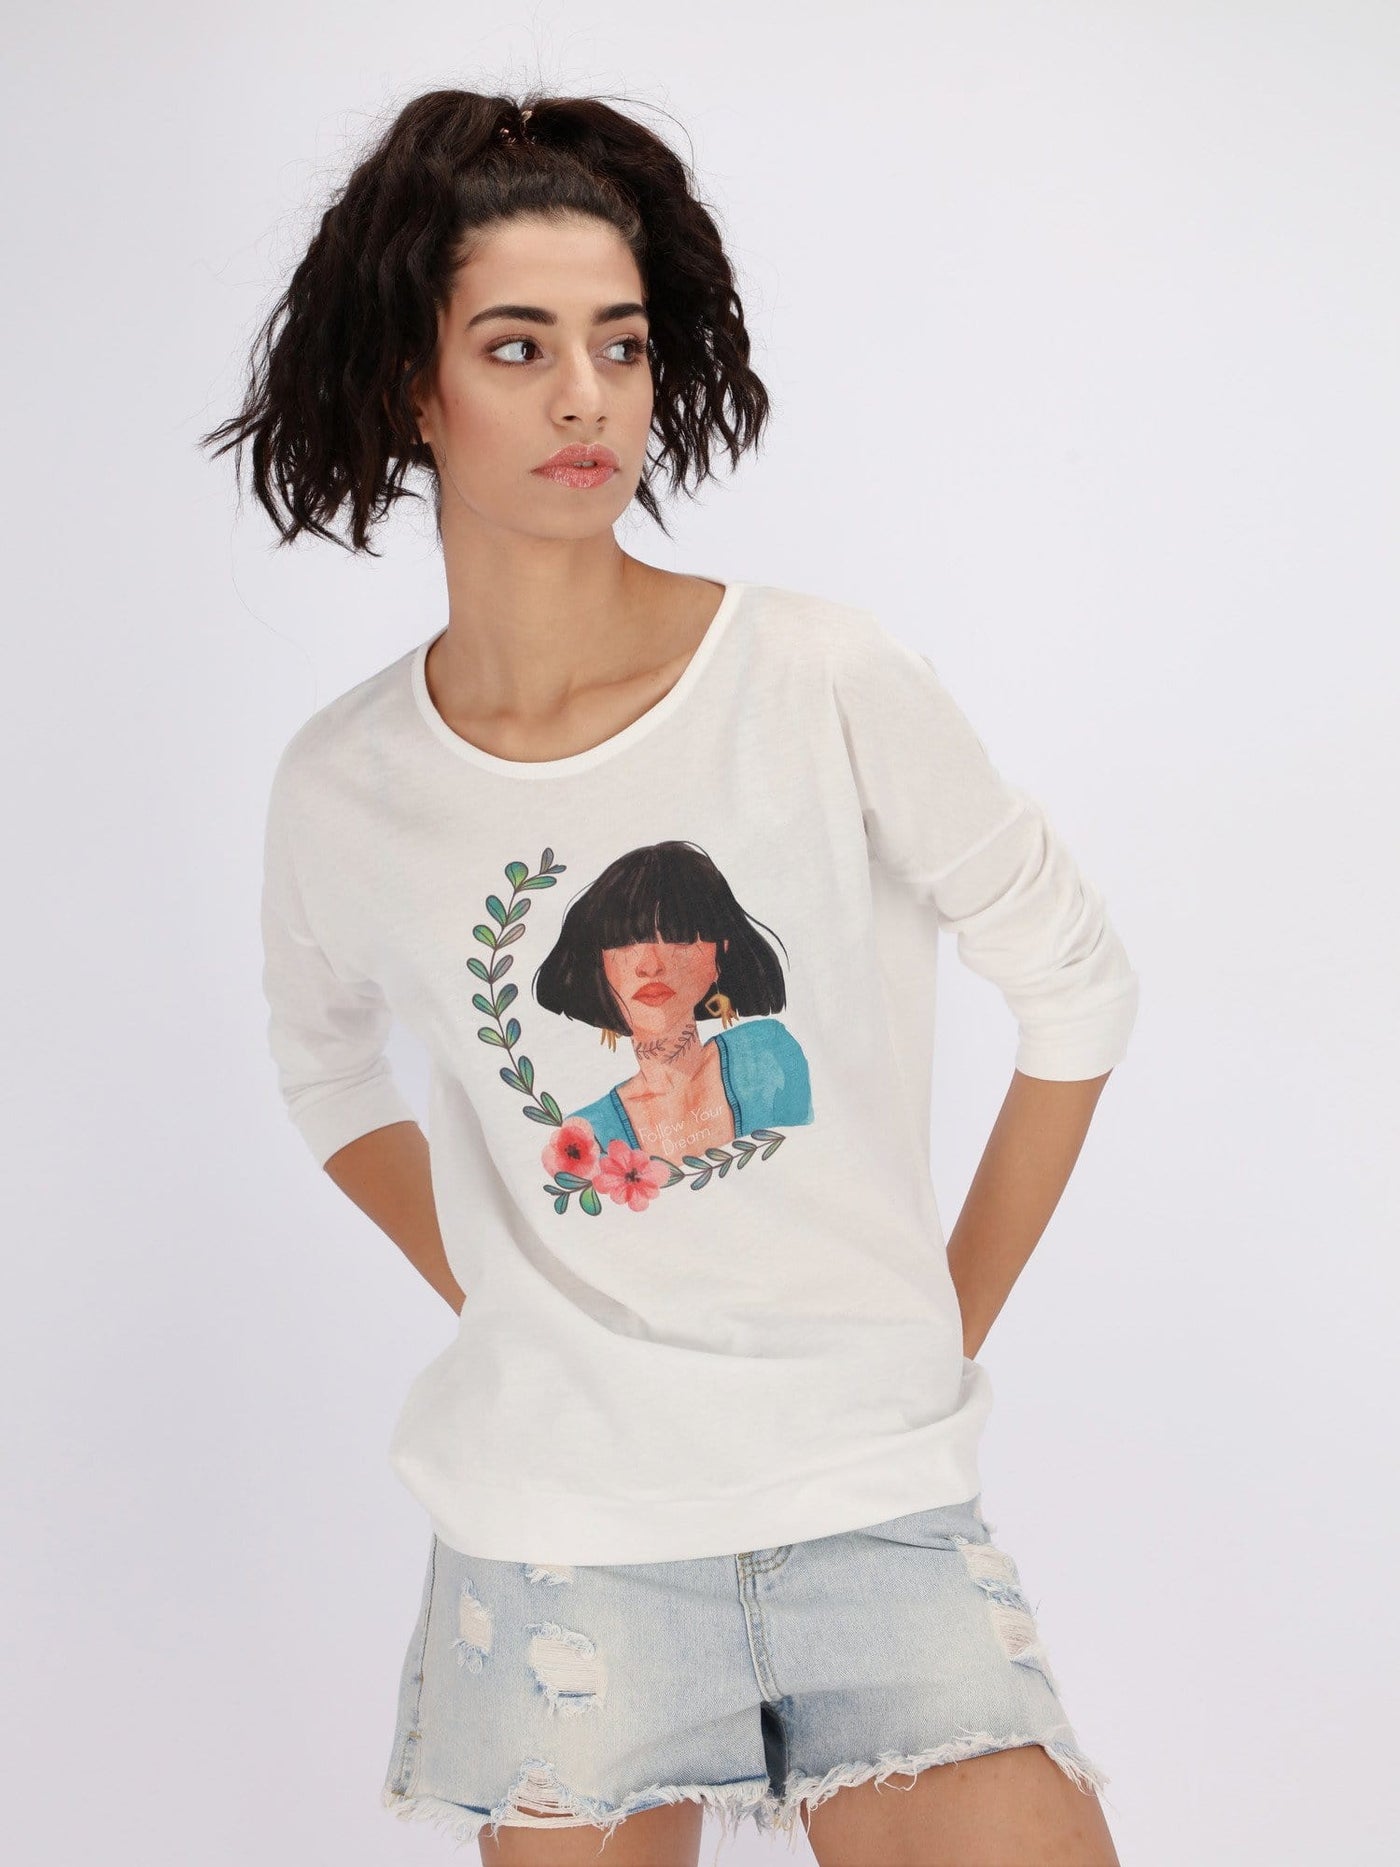 OR Tops & Blouses WHITE / S Lady with Tree Branch Printed T-shirt